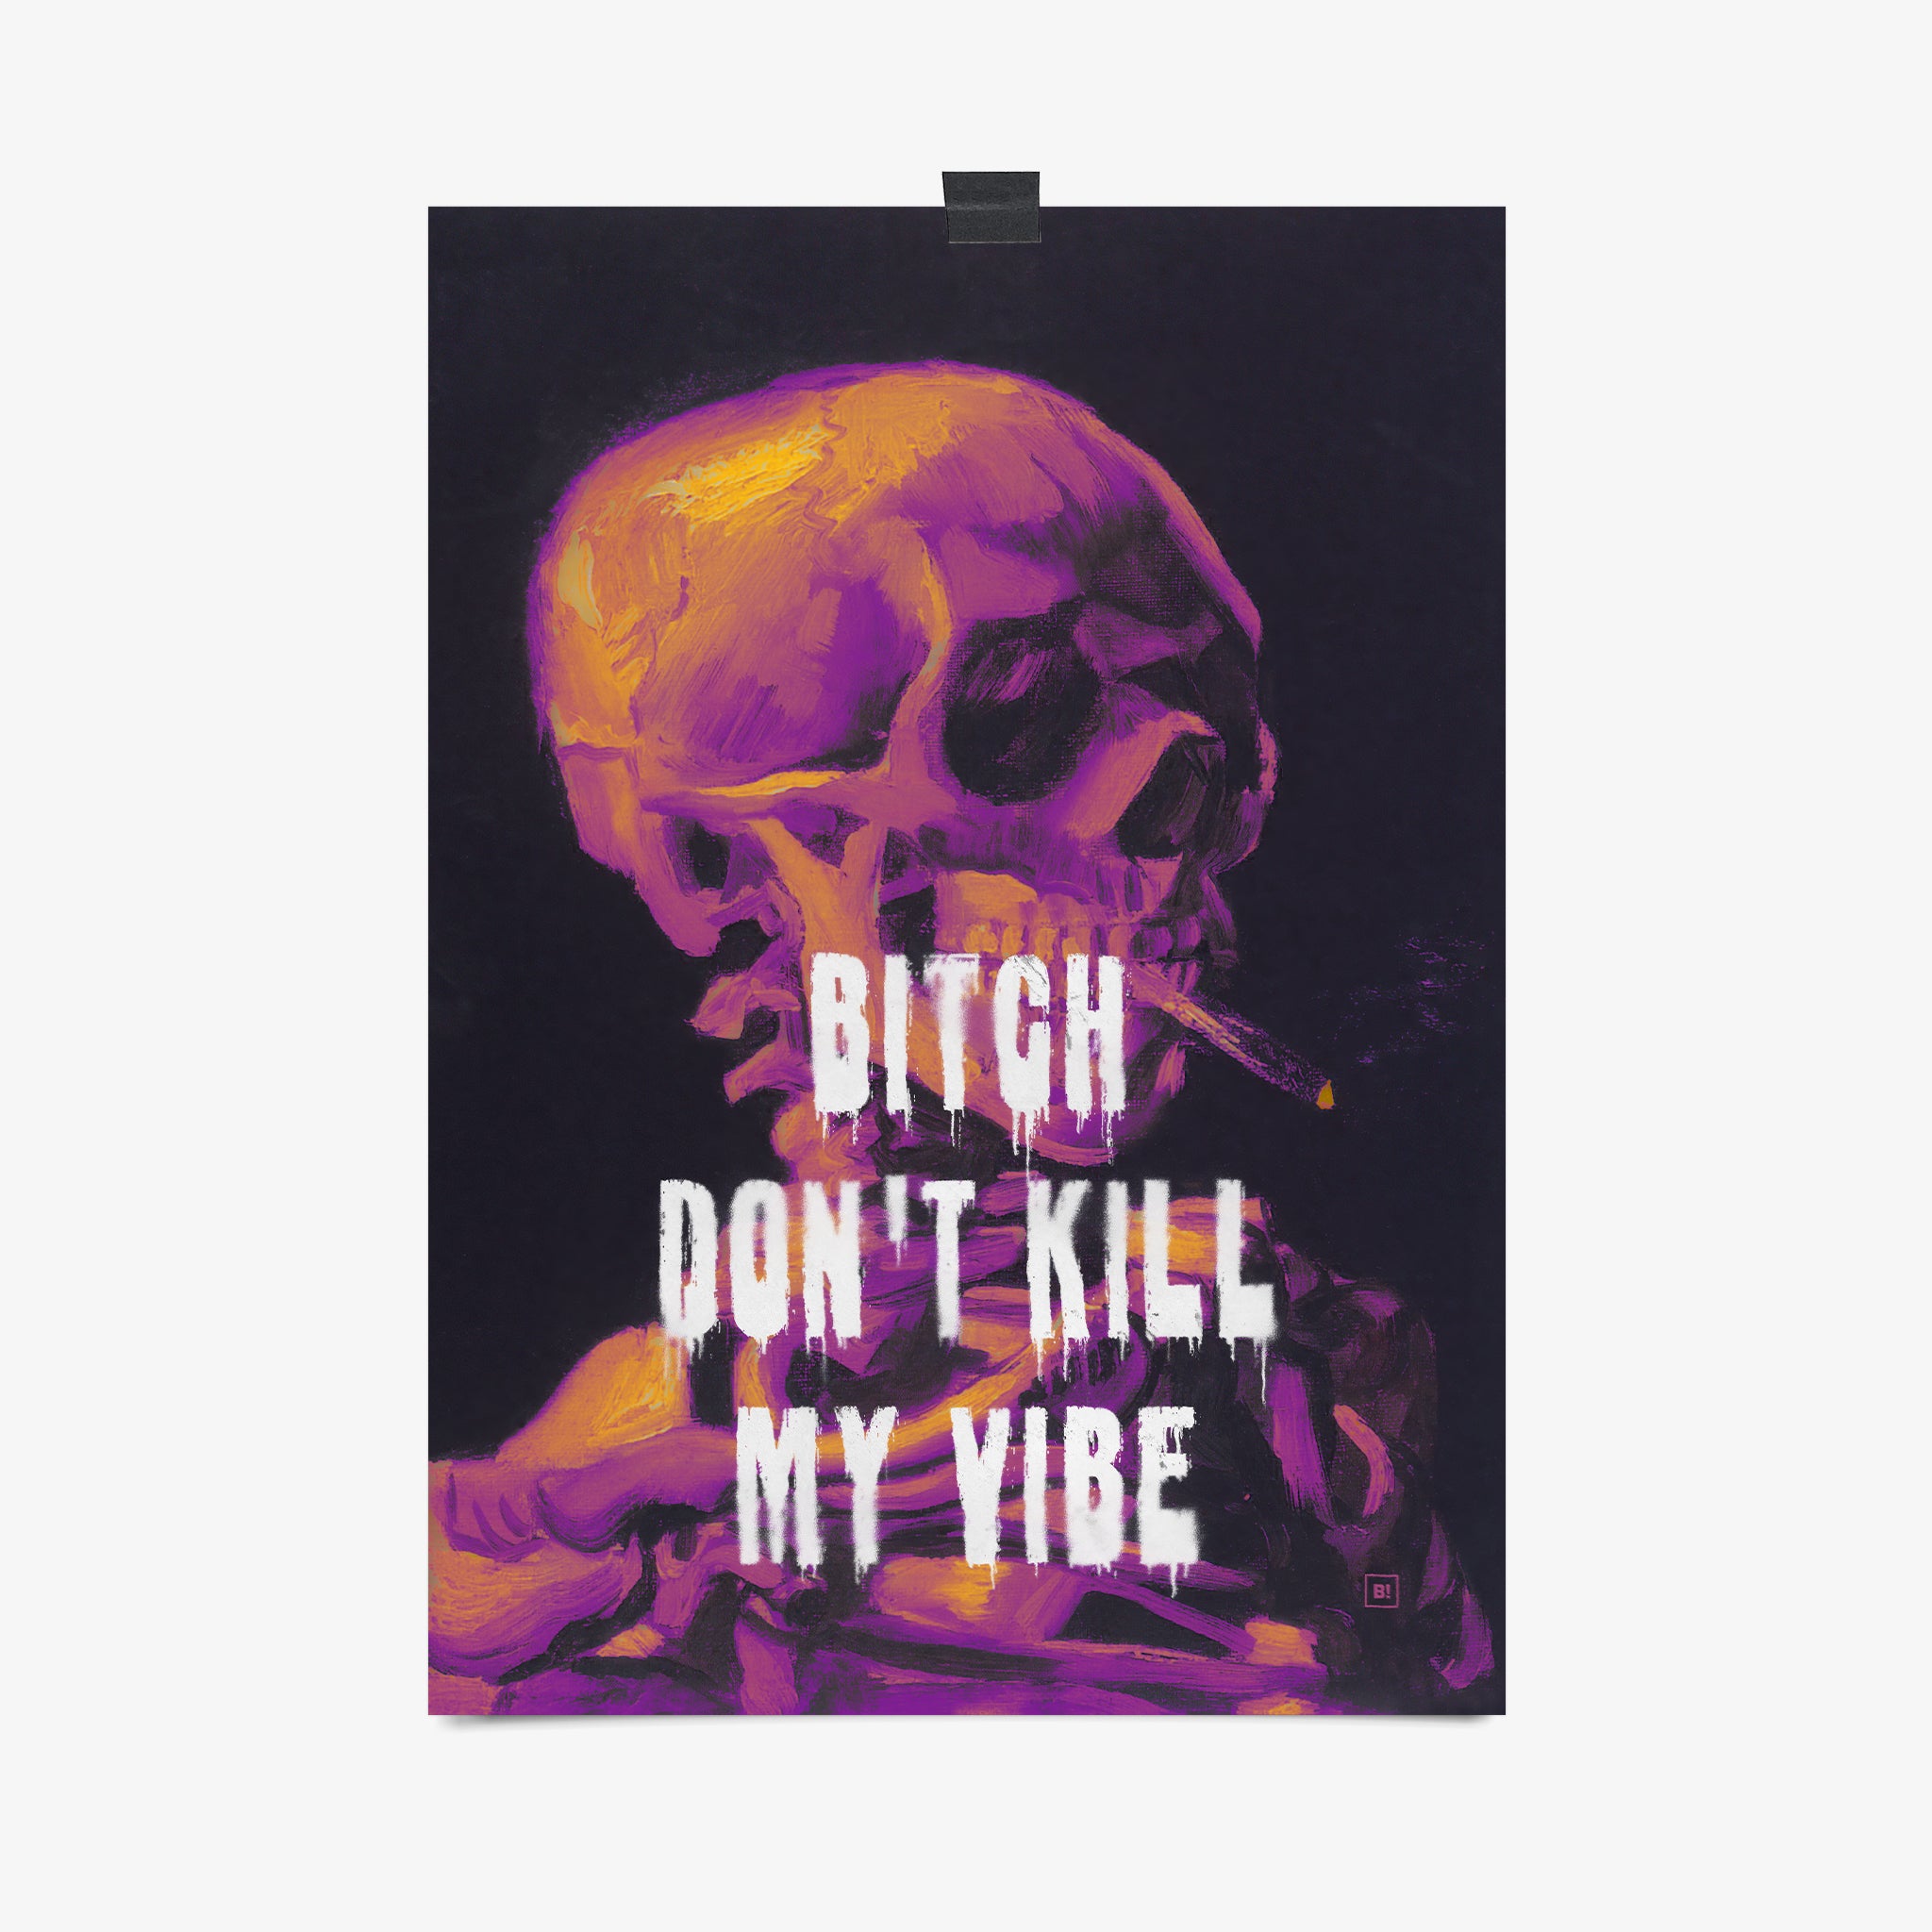 Be inspired by our altered Van Gogh's Bitch Don't Kill My Vibe art print. This artwork has been printed using the giclée process on archival acid-free paper that captures its timeless beauty in every detail.